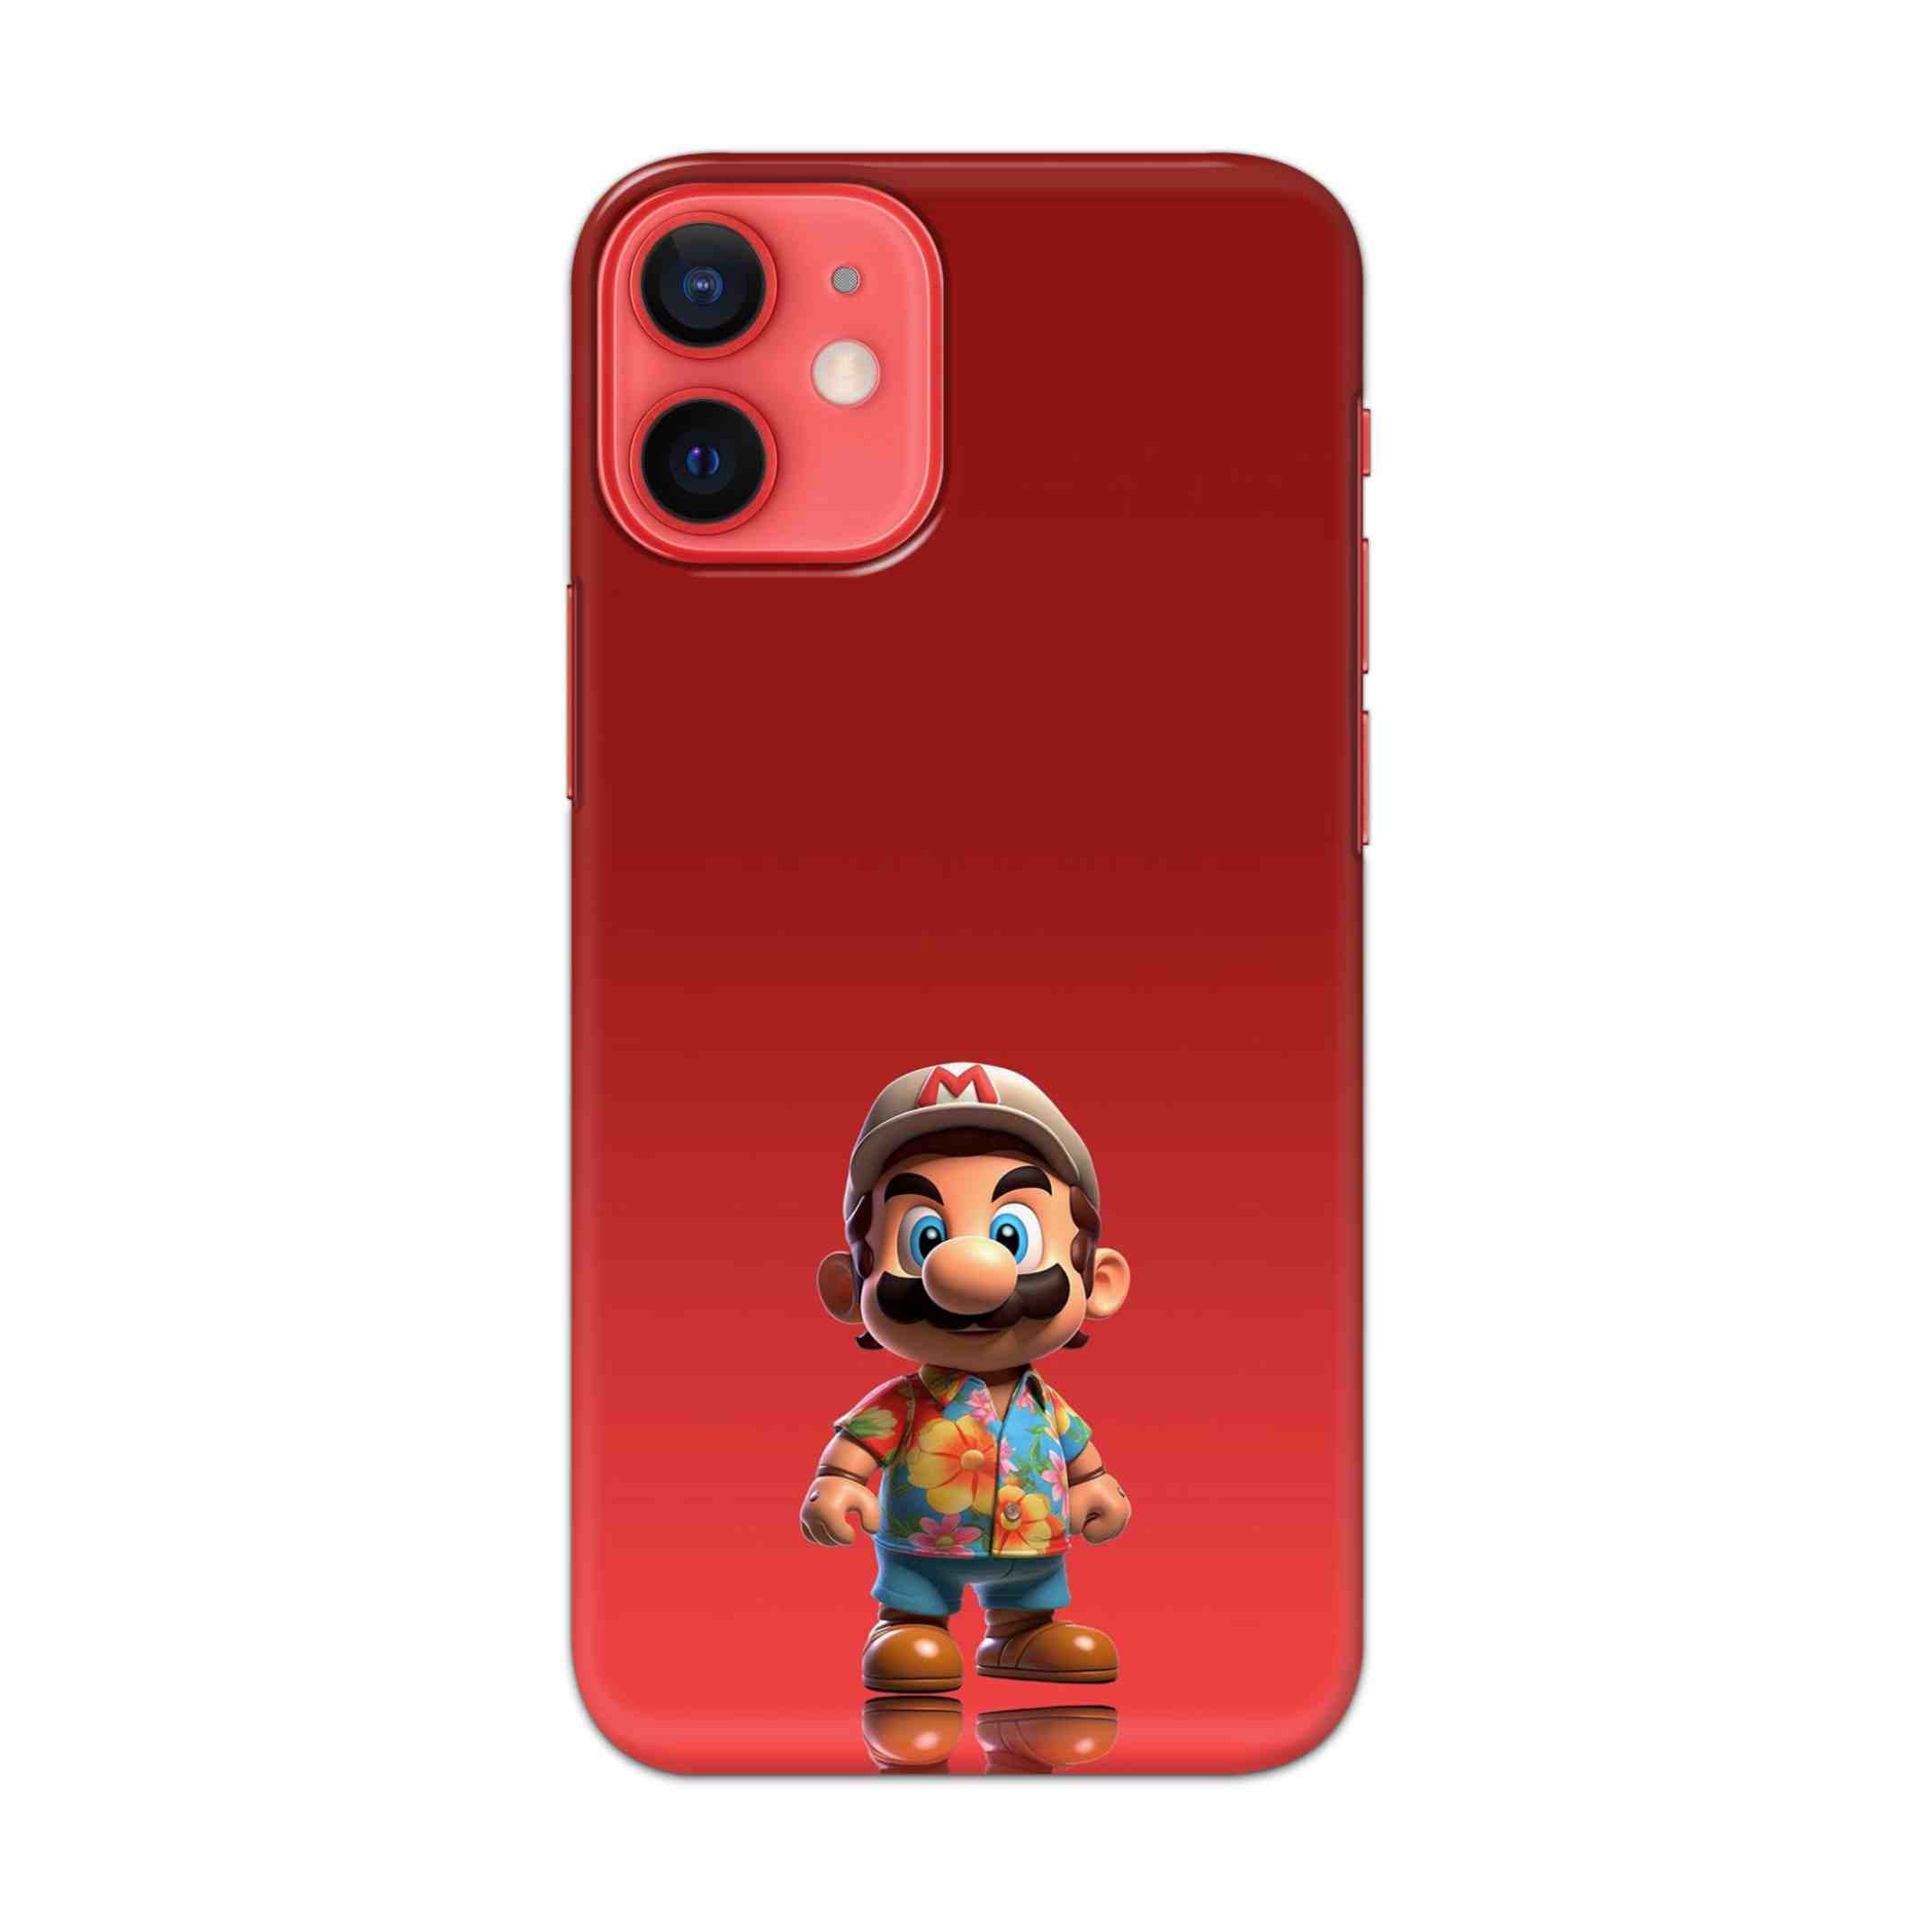 Buy Mario Hard Back Mobile Phone Case/Cover For Apple iPhone 12 mini Online